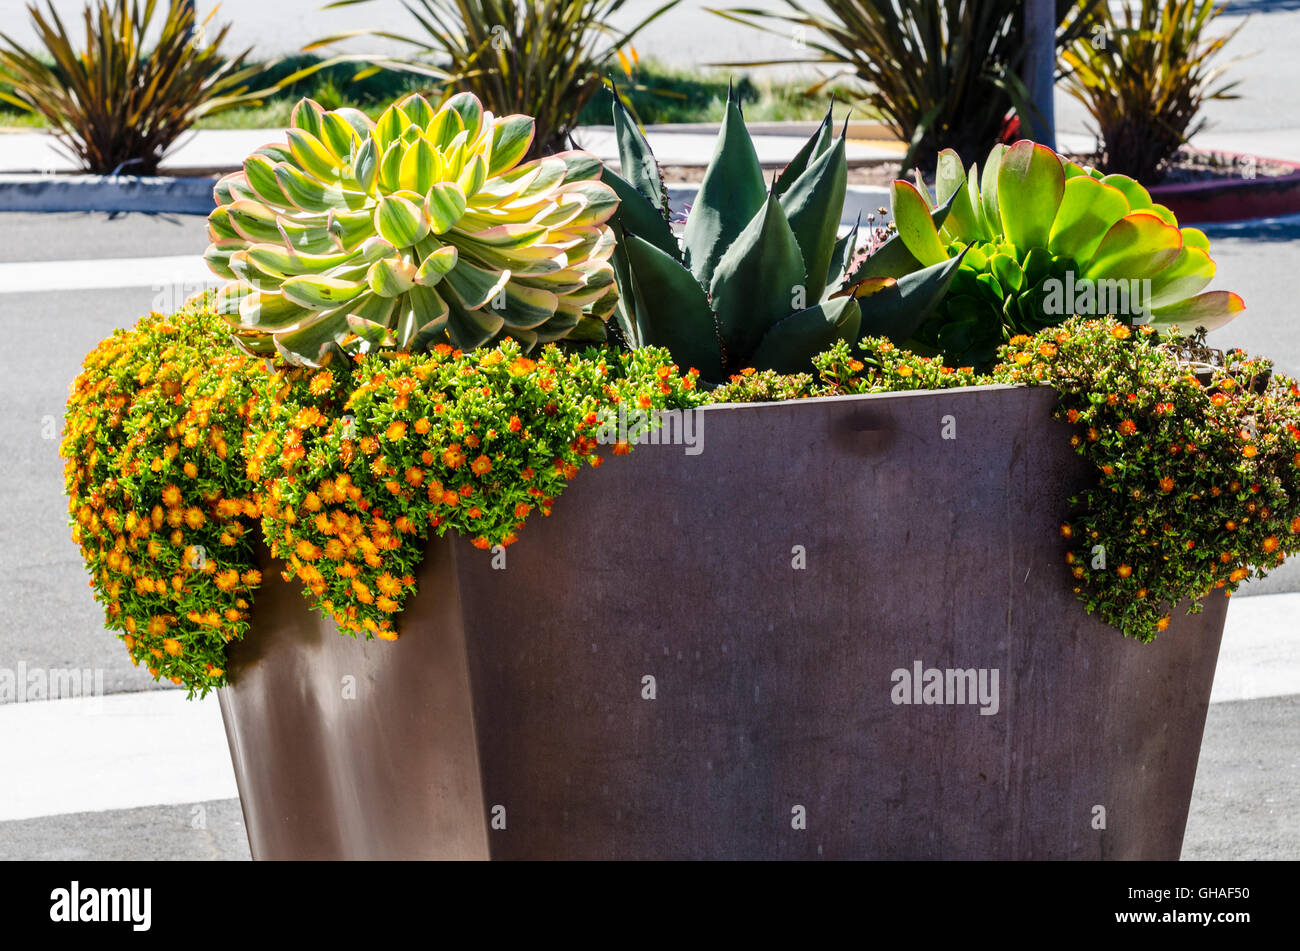 Colorful water friendly drought tolerant plants in California Stock Photo